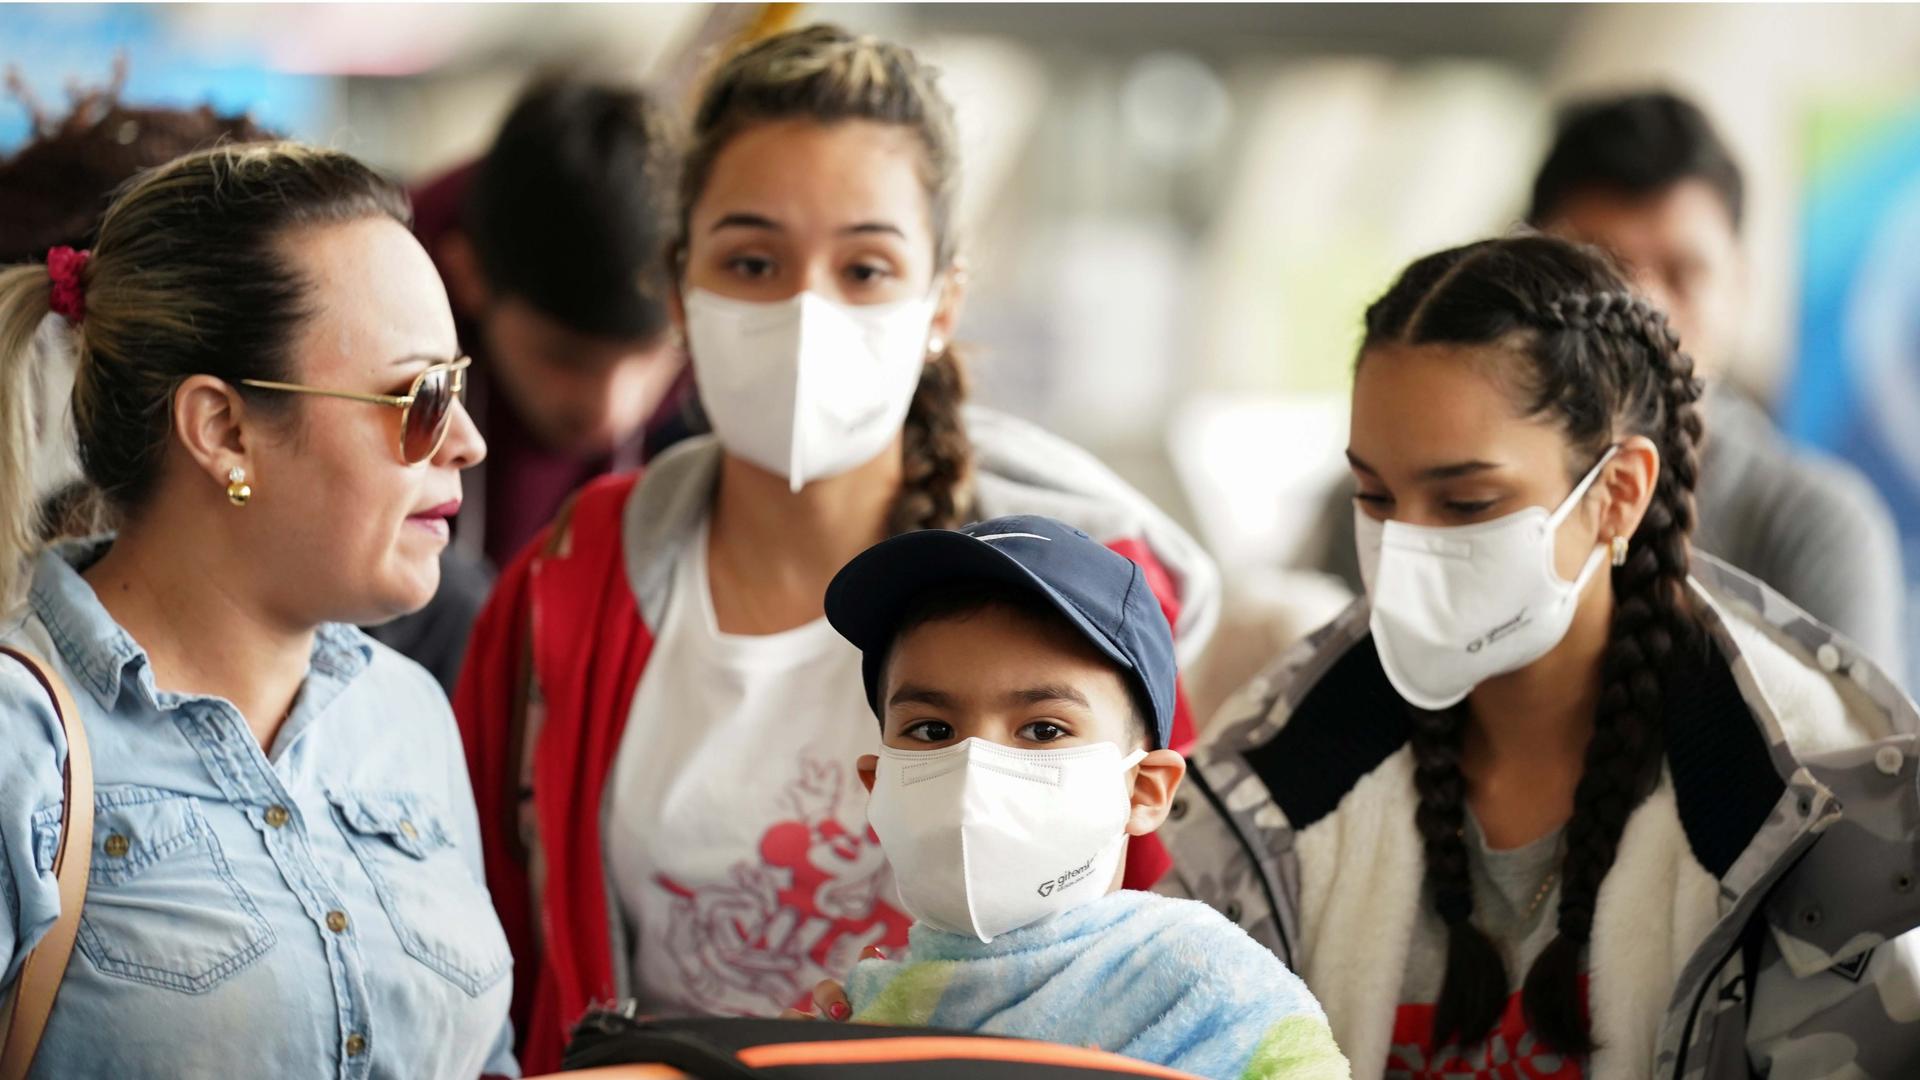 A family wearing face masks queues in a check-in line at Dulles International Airport a day after US President Donald Trump announced travel restrictions on flights from Europe to the United States for 30 days to try to contain the coronavirus, in Dulles.